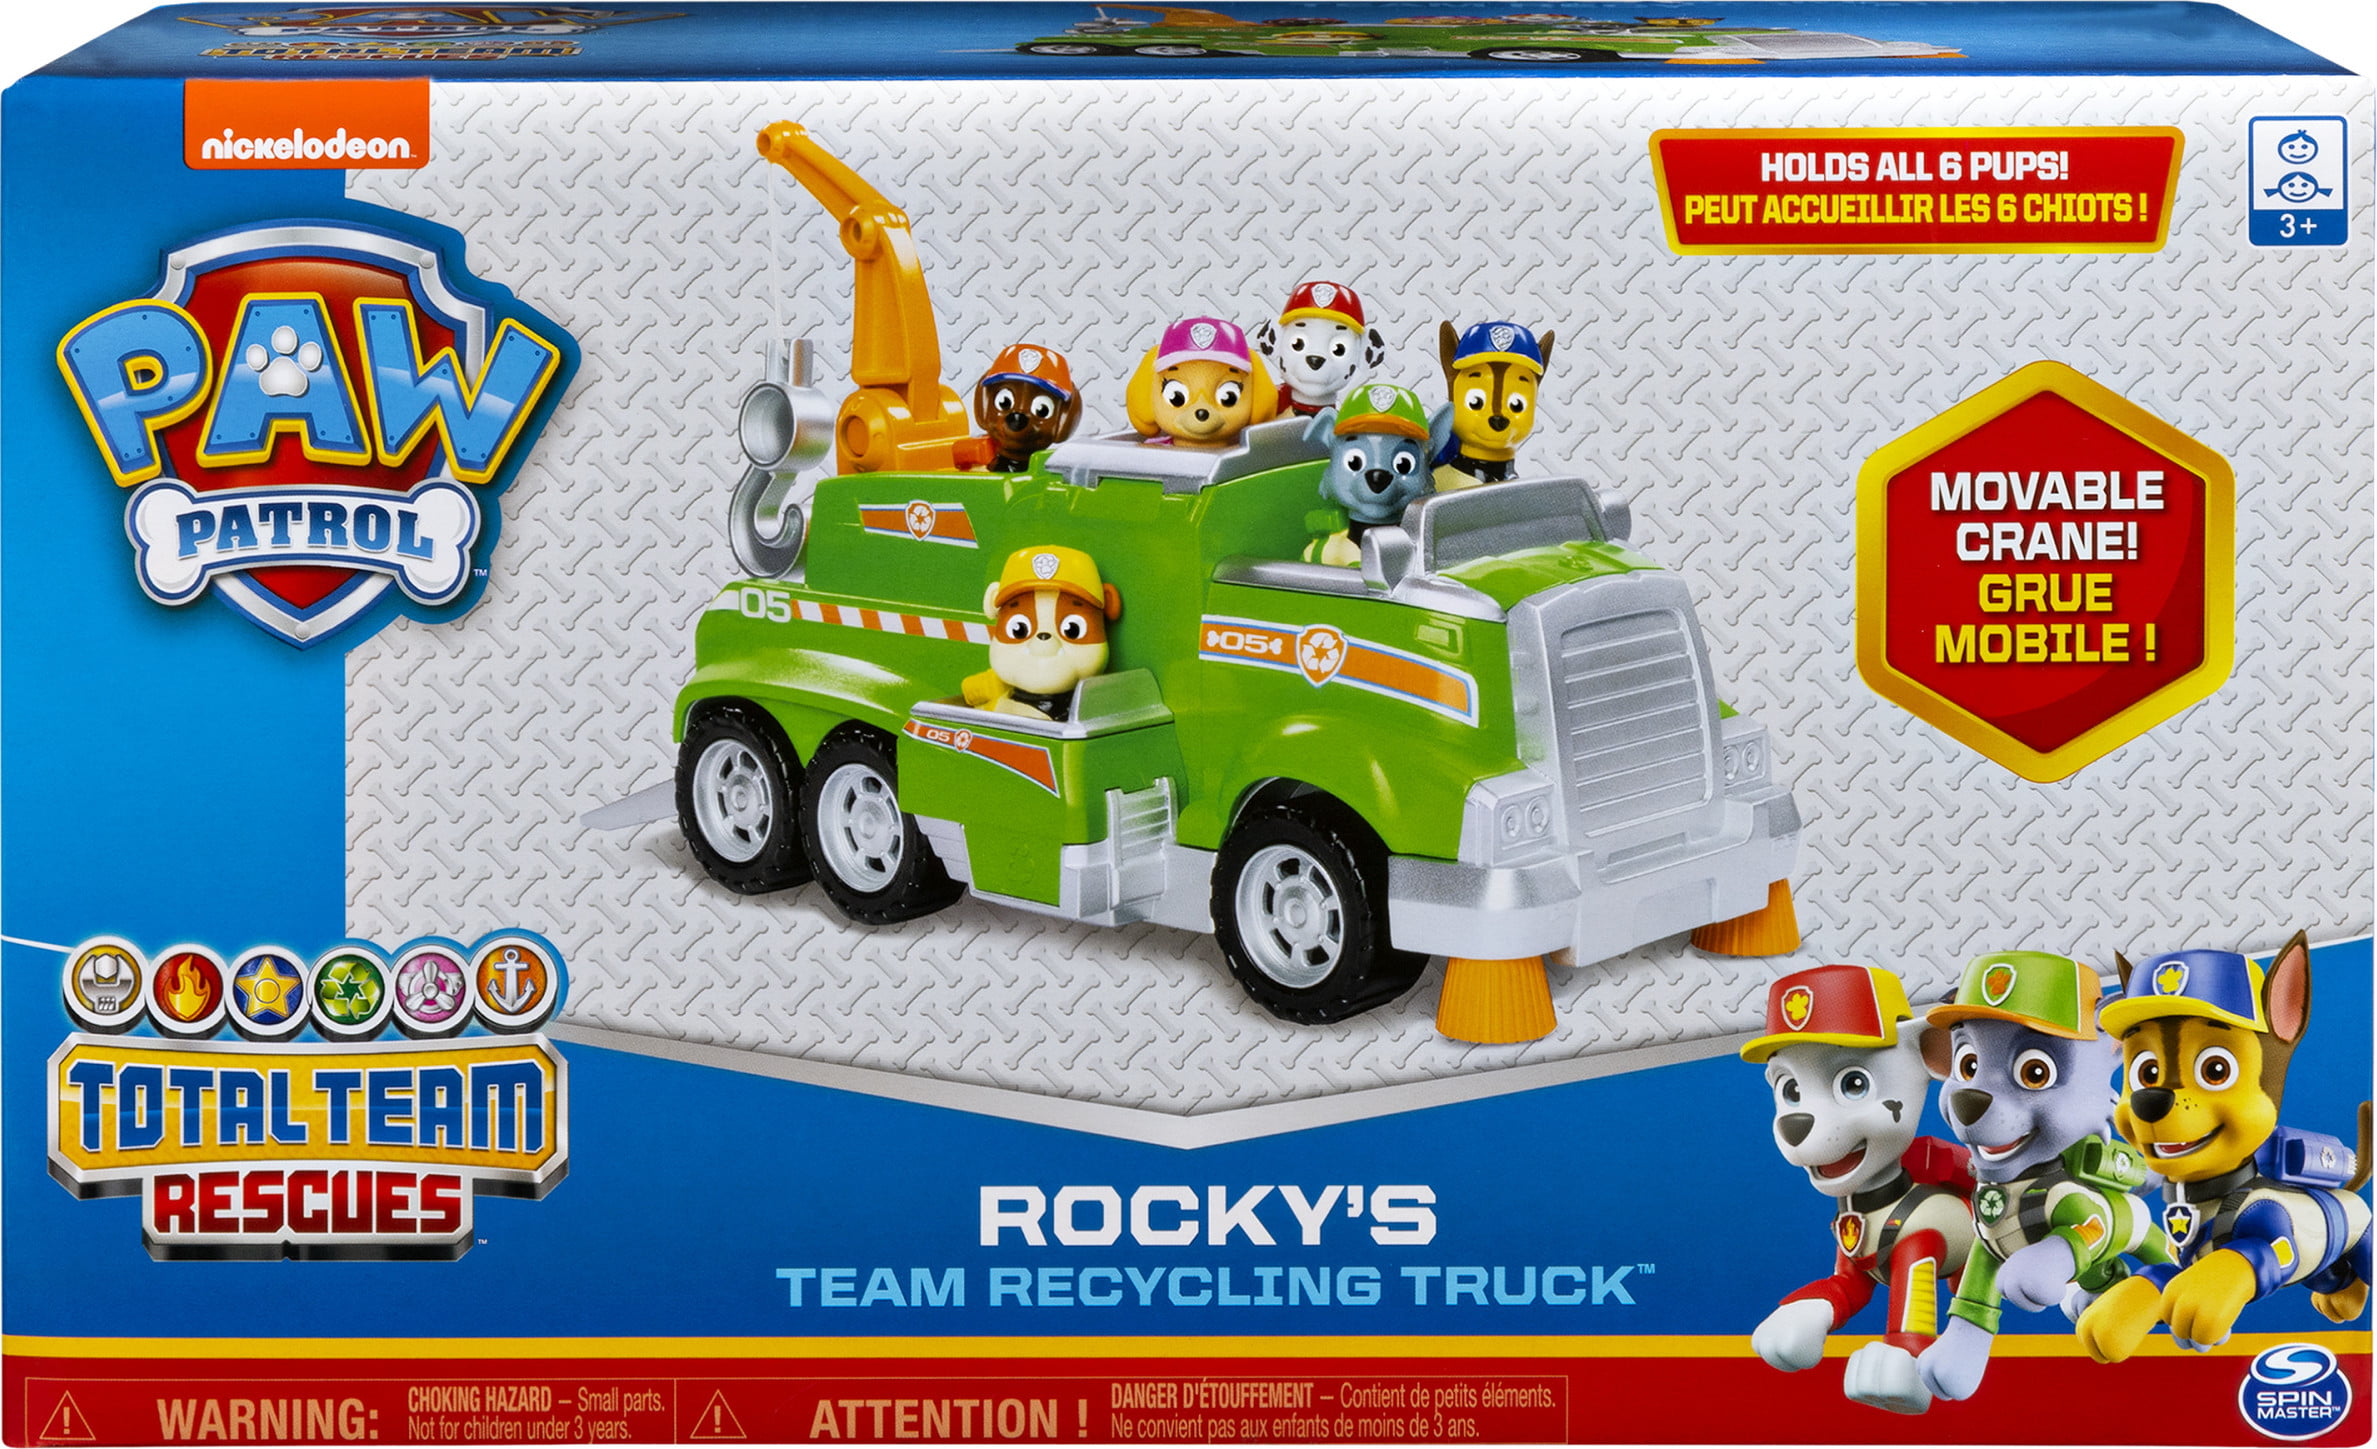 PAW Patrol, Rocky's Total Team Rescue Recycling Truck with 6 Pups